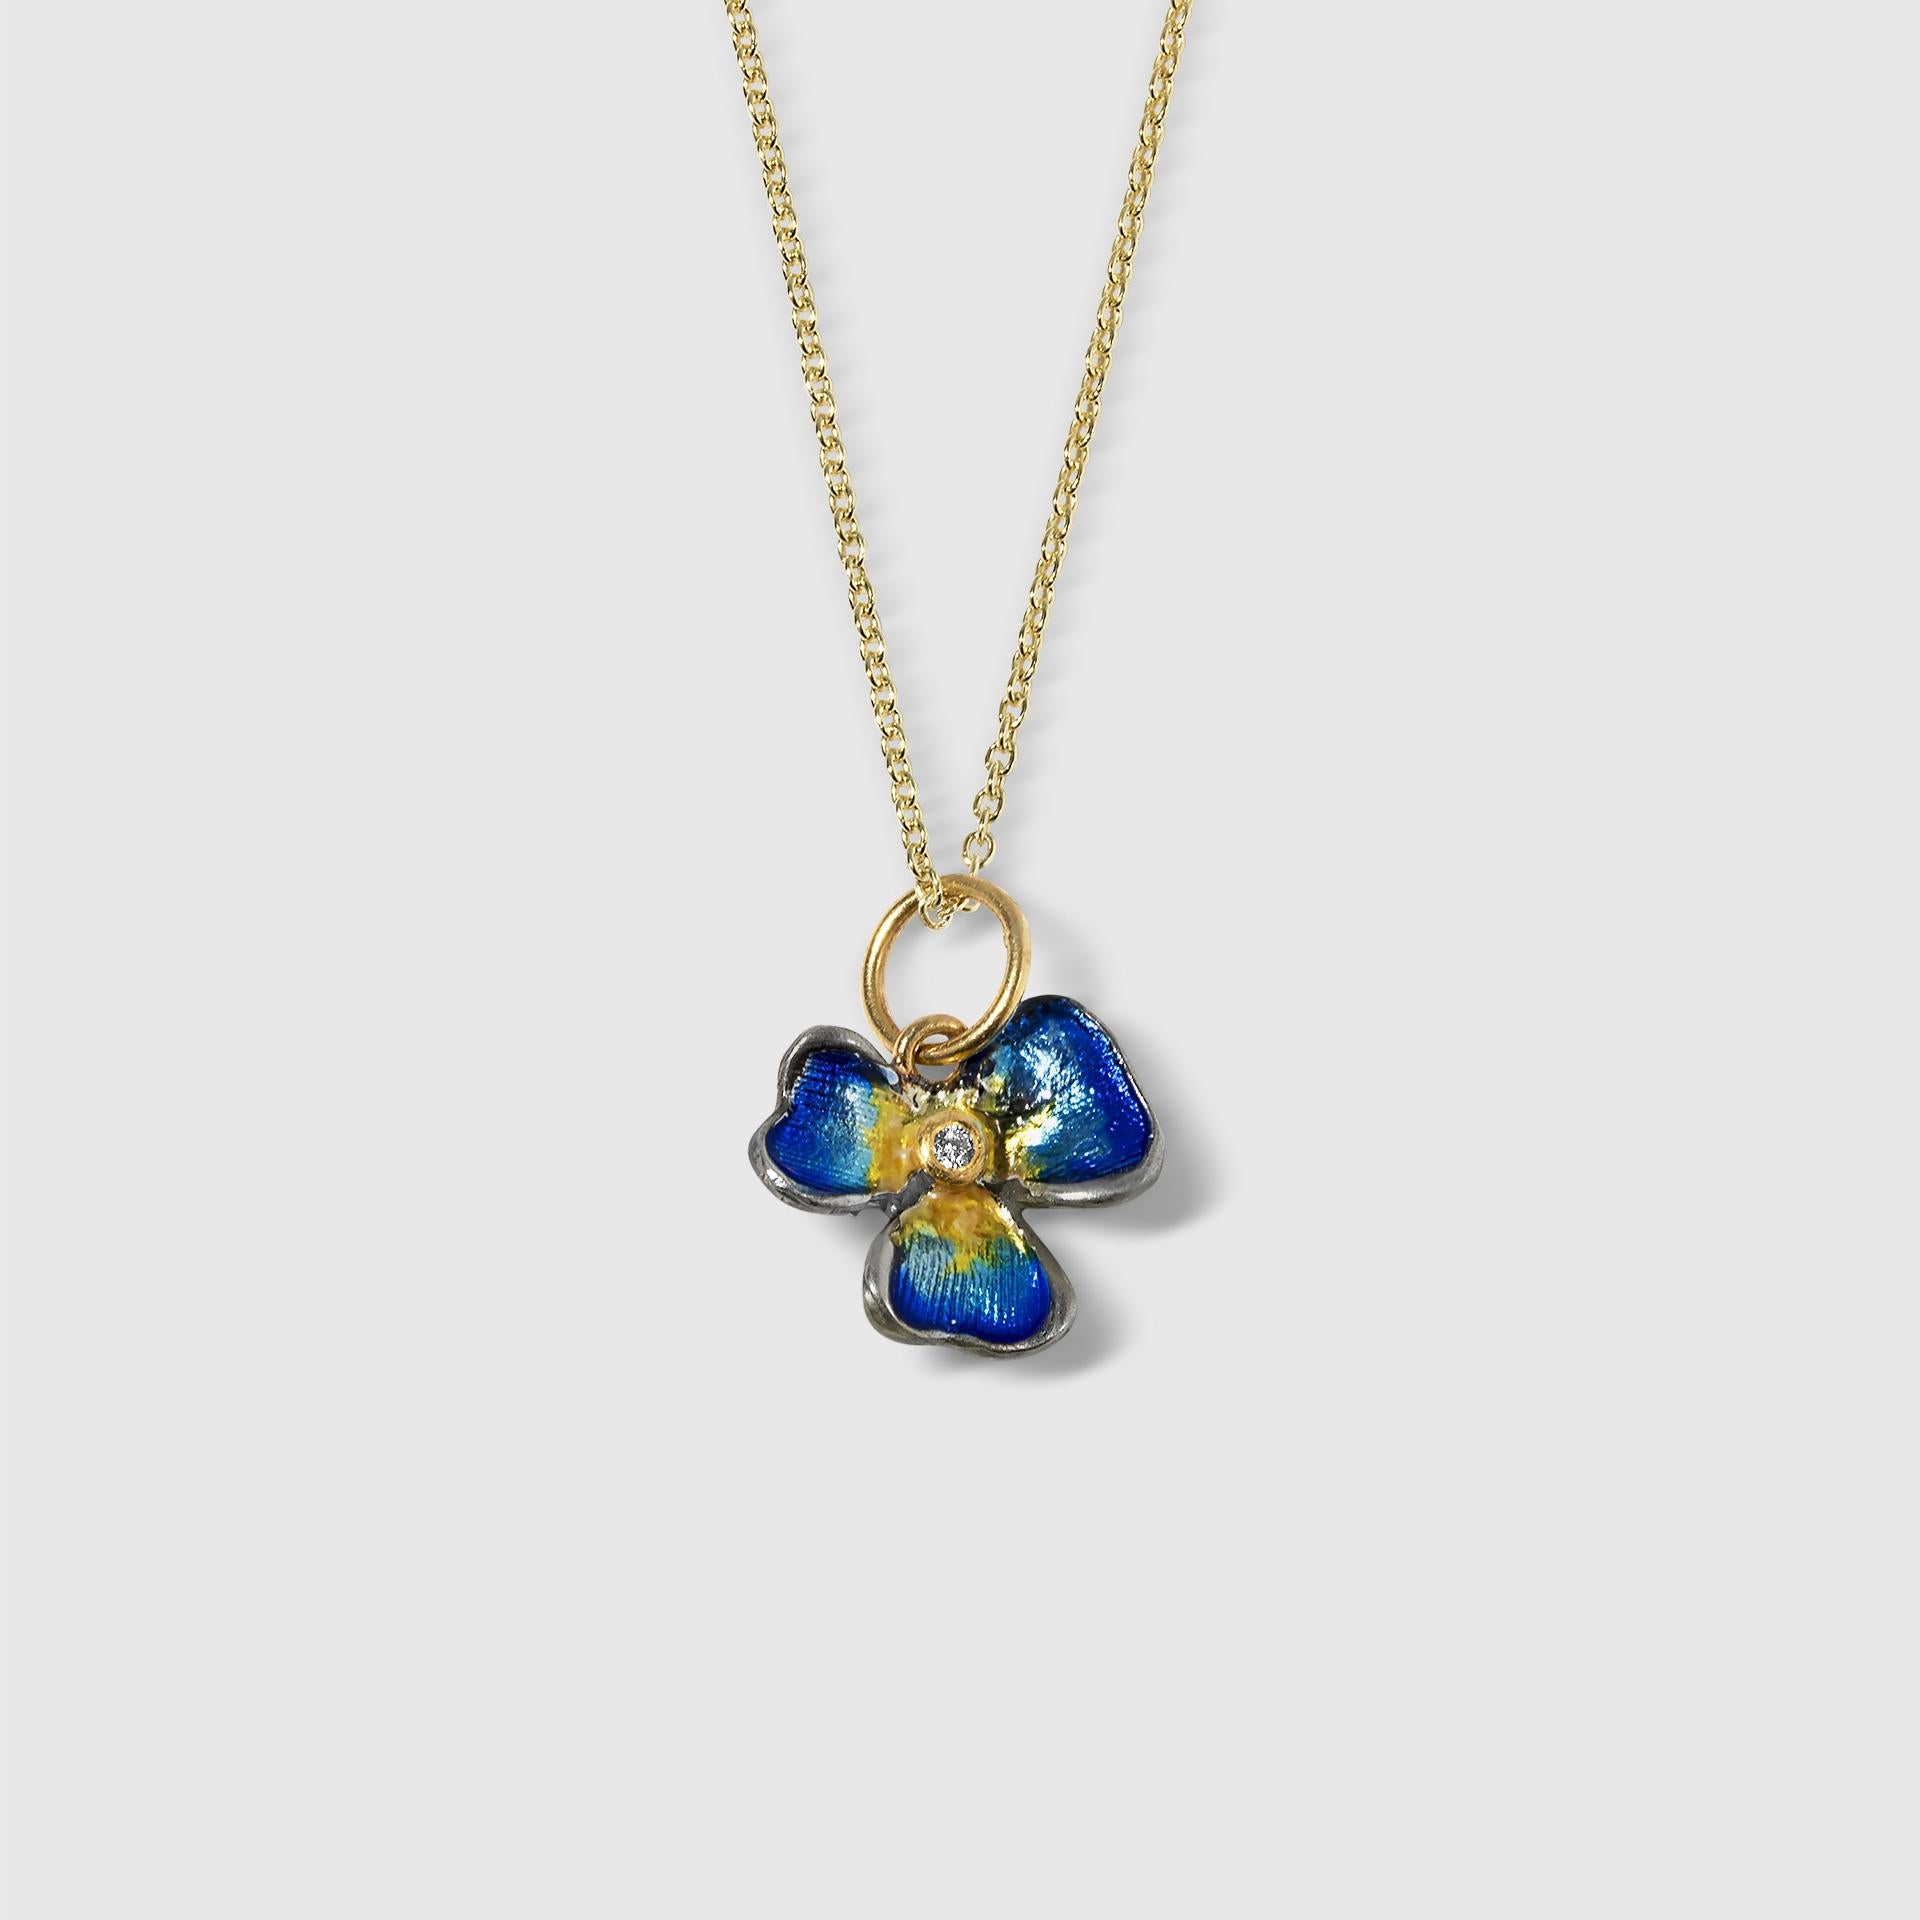 Pansy Flower pendant, enamel - Blue and Yellow Enamel and Diamond Flower Pendant Necklace set in  24kt Yellow Gold and Silver by Prehistoric Works of Istanbul, Turkey. These pendants look great alone or paired with other coin pendants or with